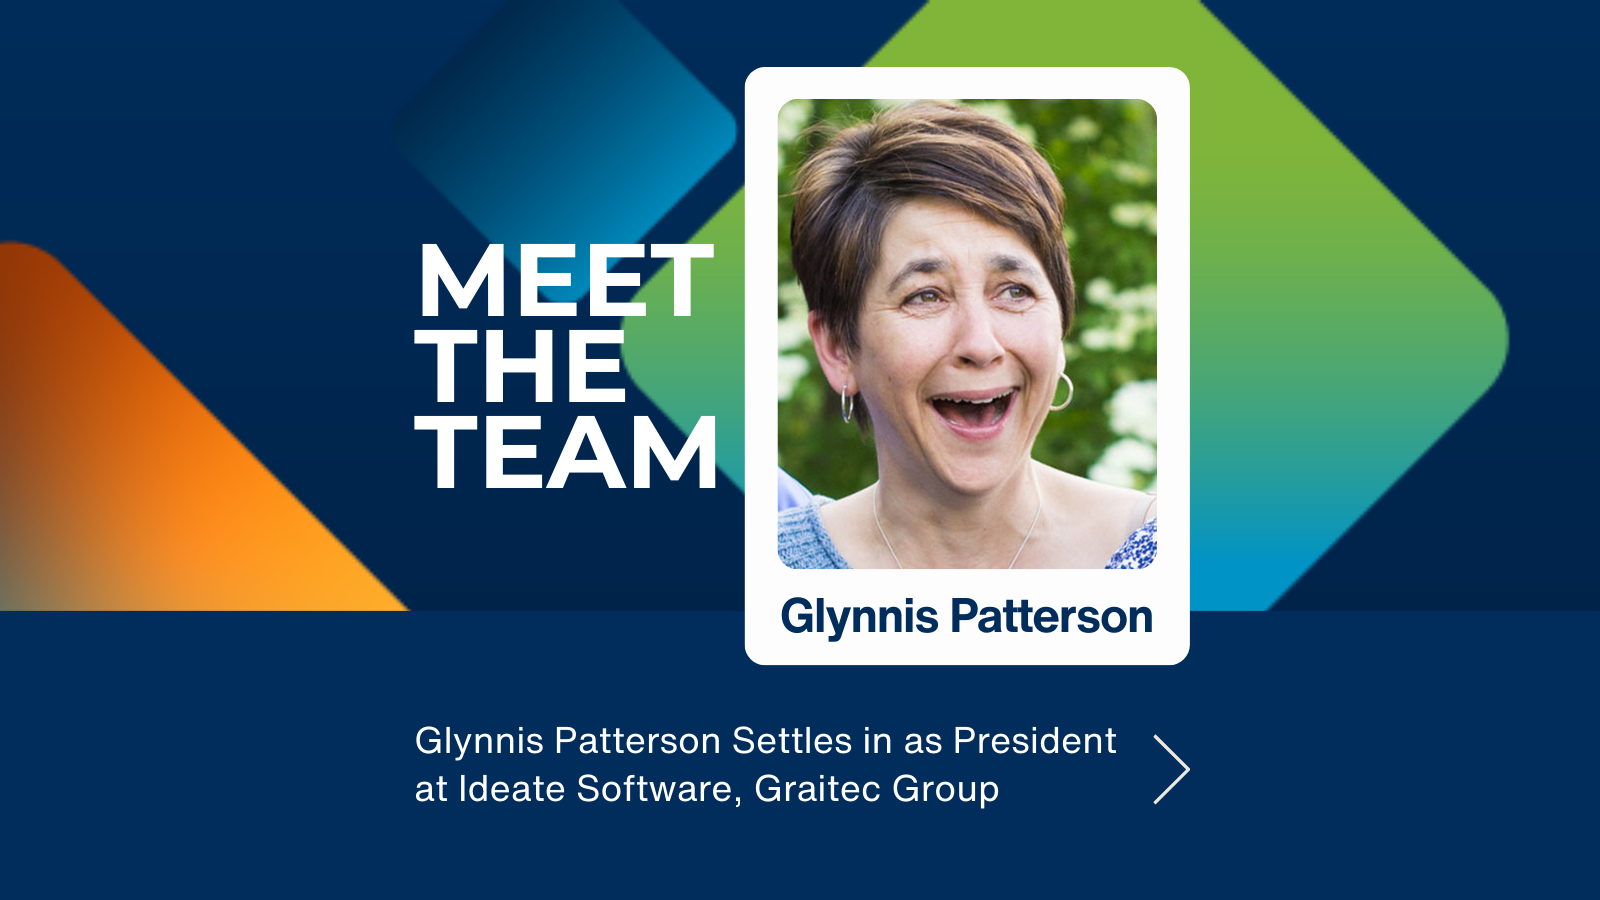 Meet the Team, Glynnis Patterson